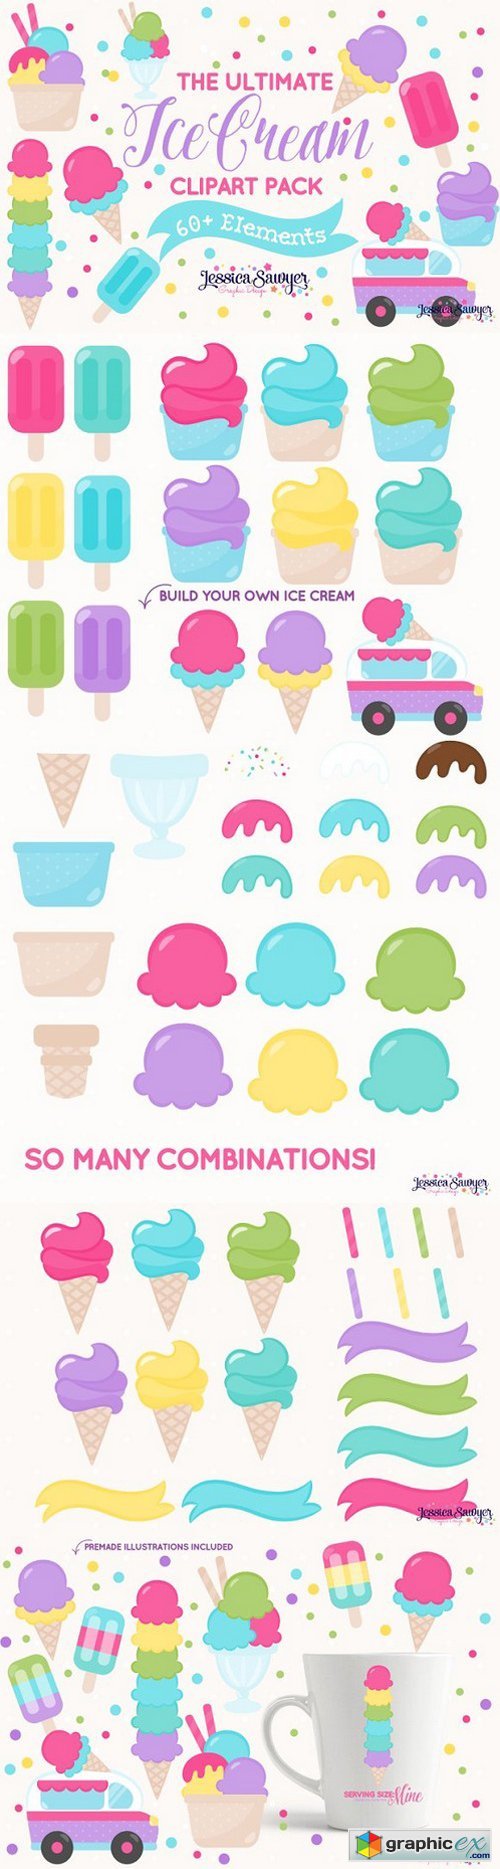 The Ultimate Ice Cream Clipart Pack